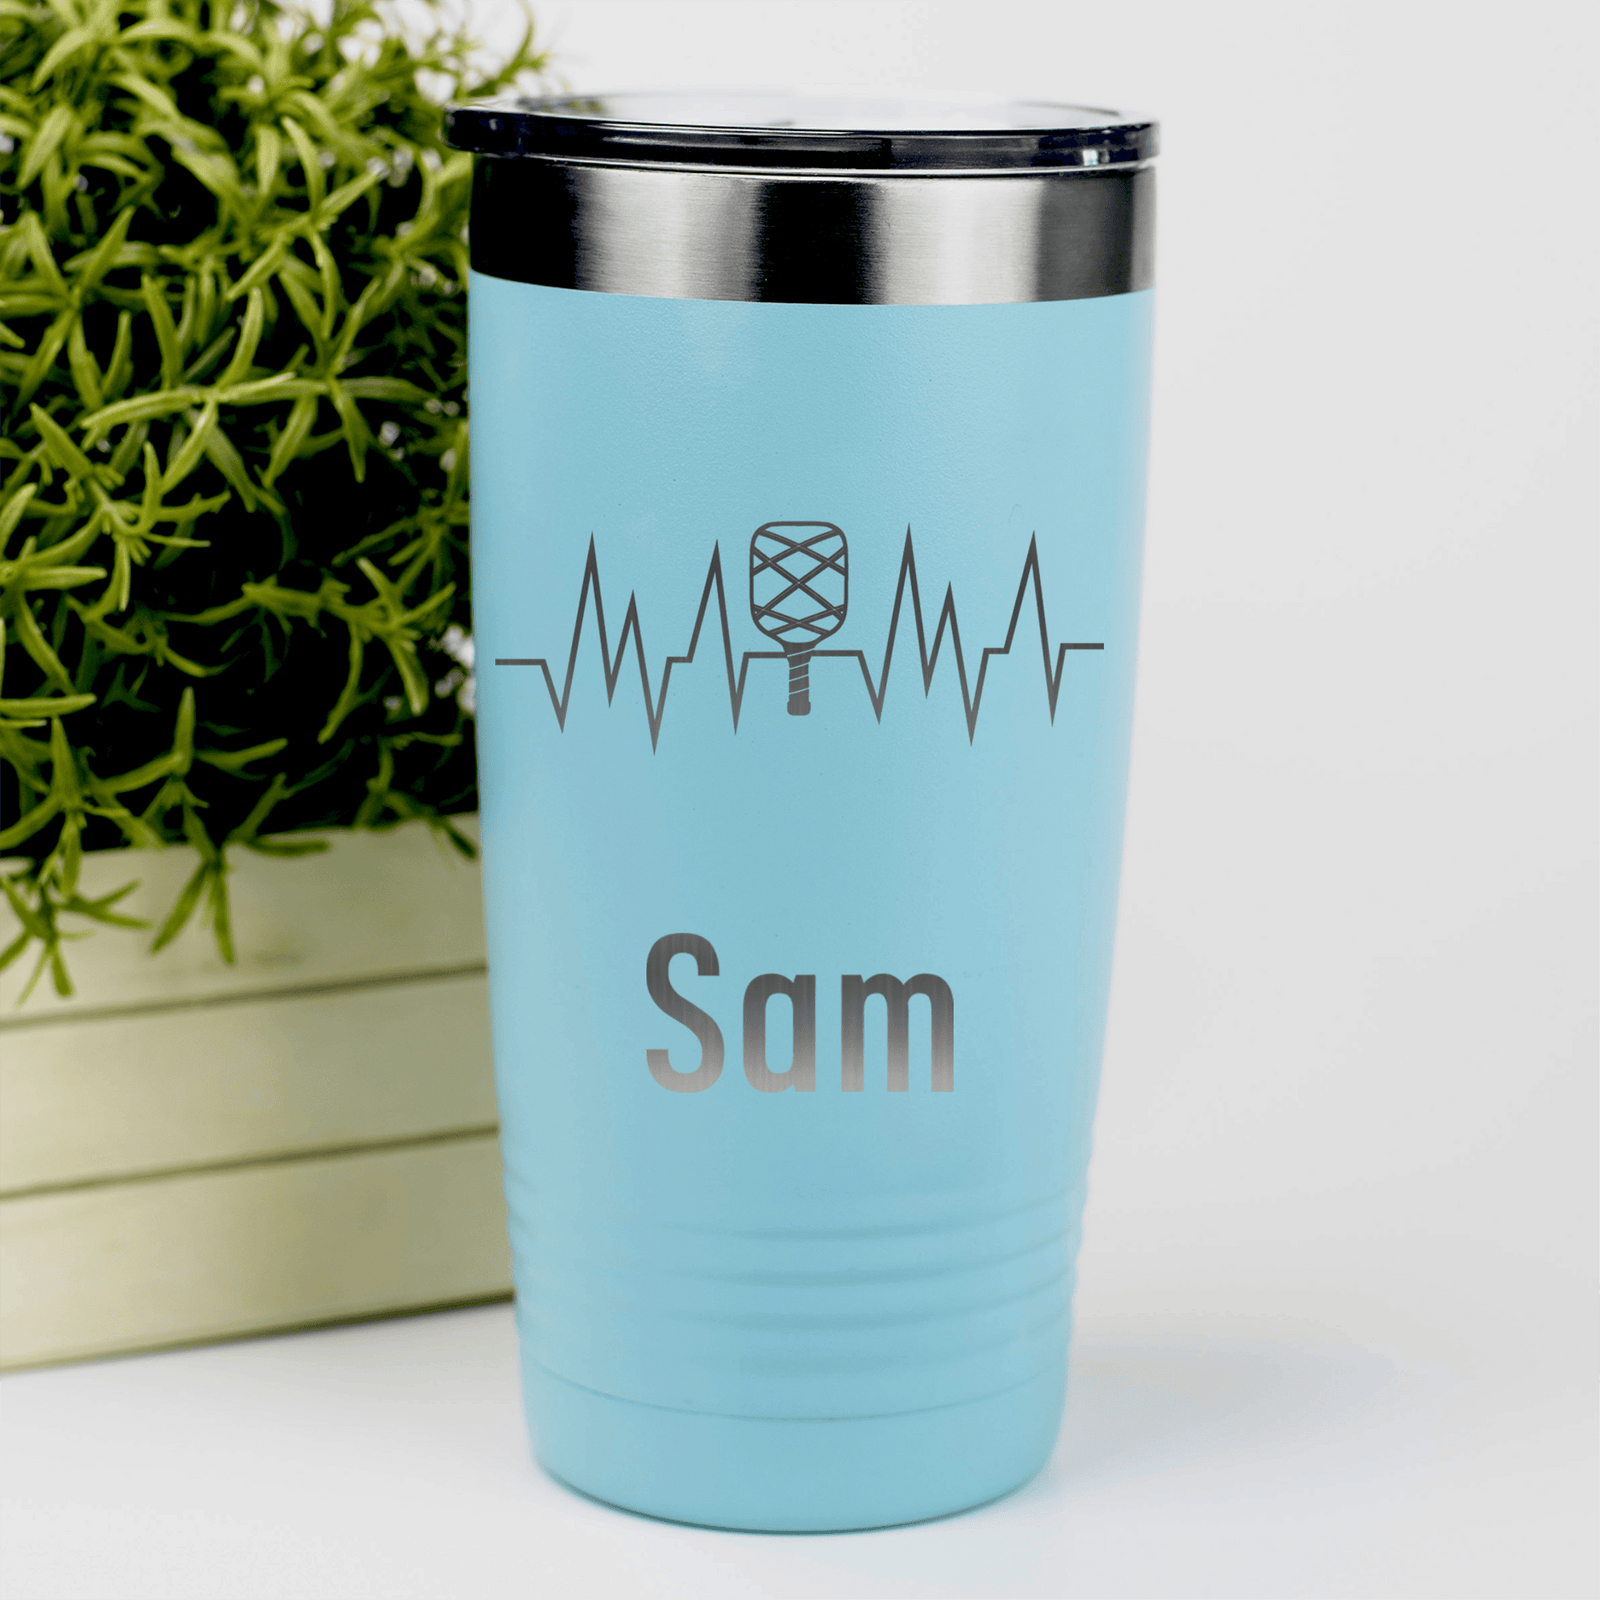 Teal Pickleball Tumbler With Pickle Beats Design